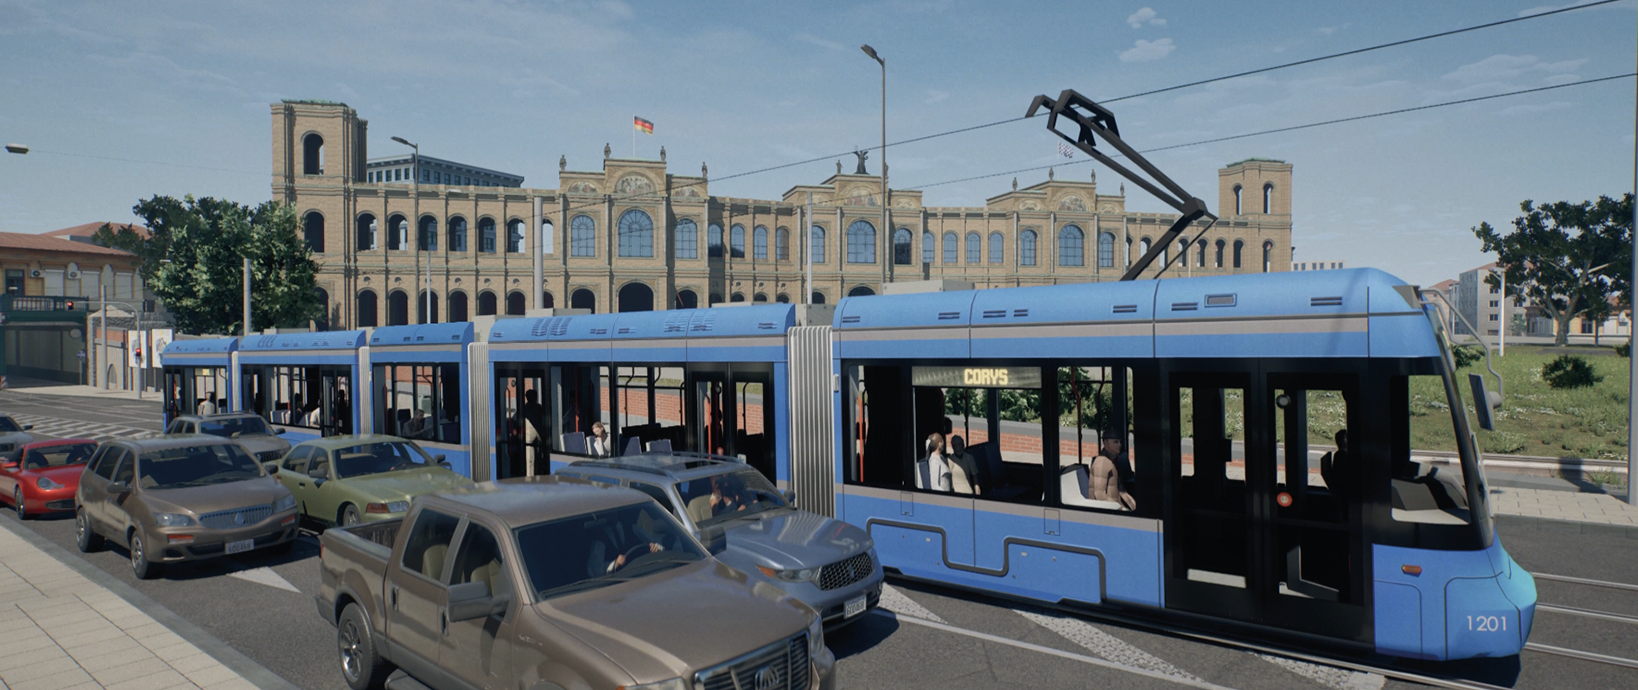 an immersive training experience for tramway drivers in munich